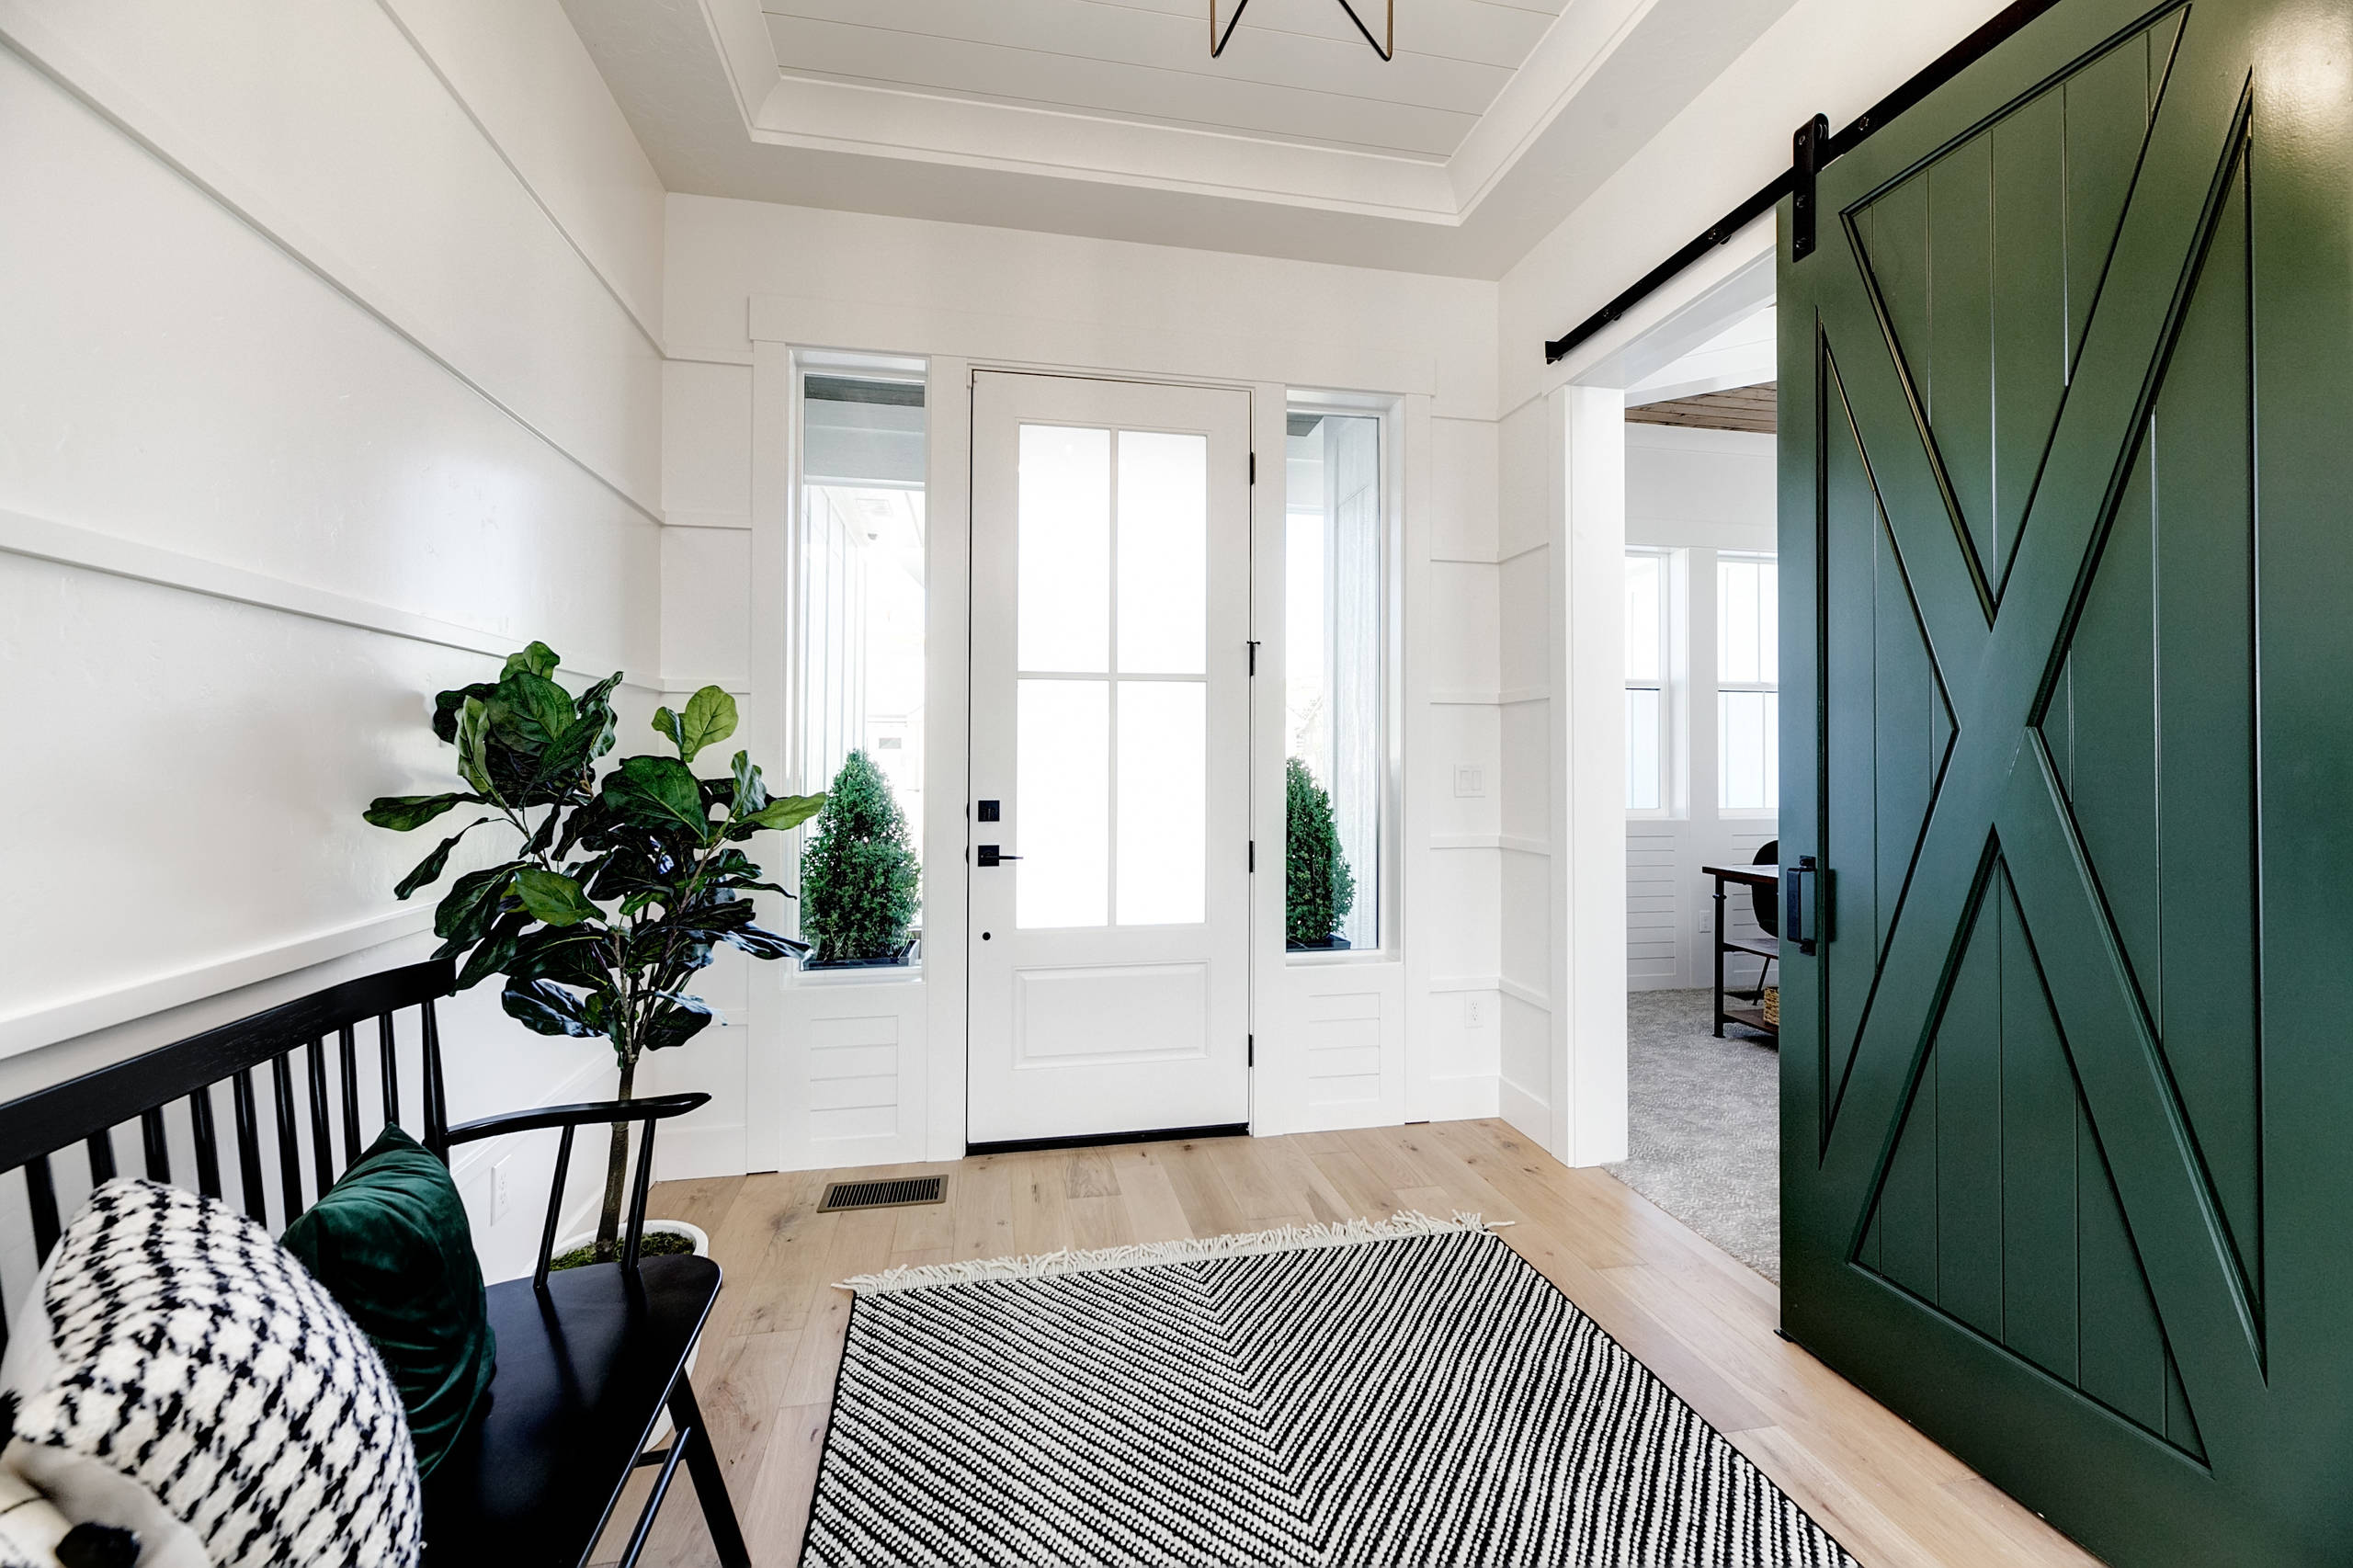 75 Beautiful Entryway With White Walls Pictures Ideas April 2021 Houzz